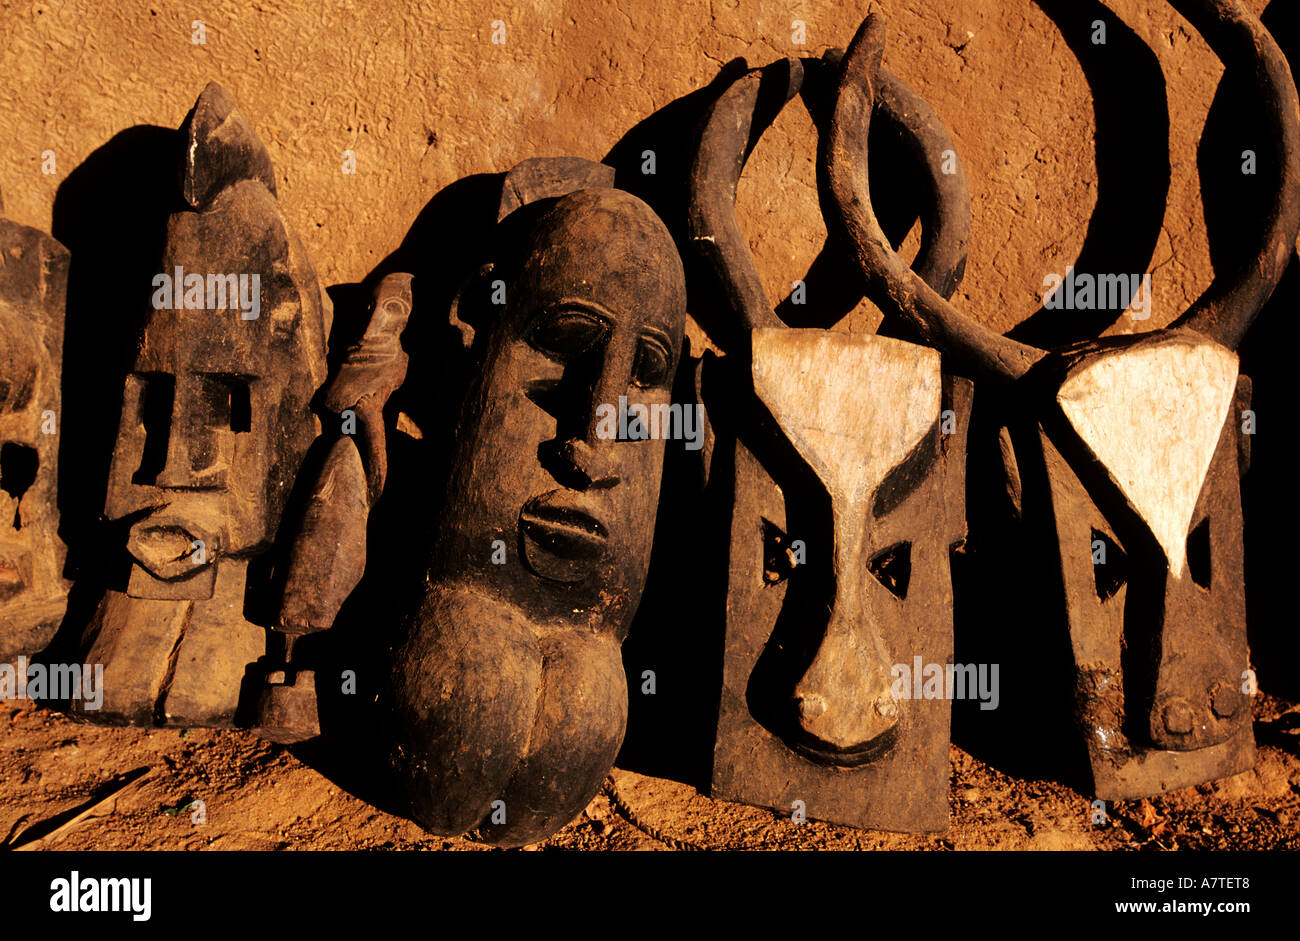 Mali, Pays Dogon, Dogon masques Banque D'Images